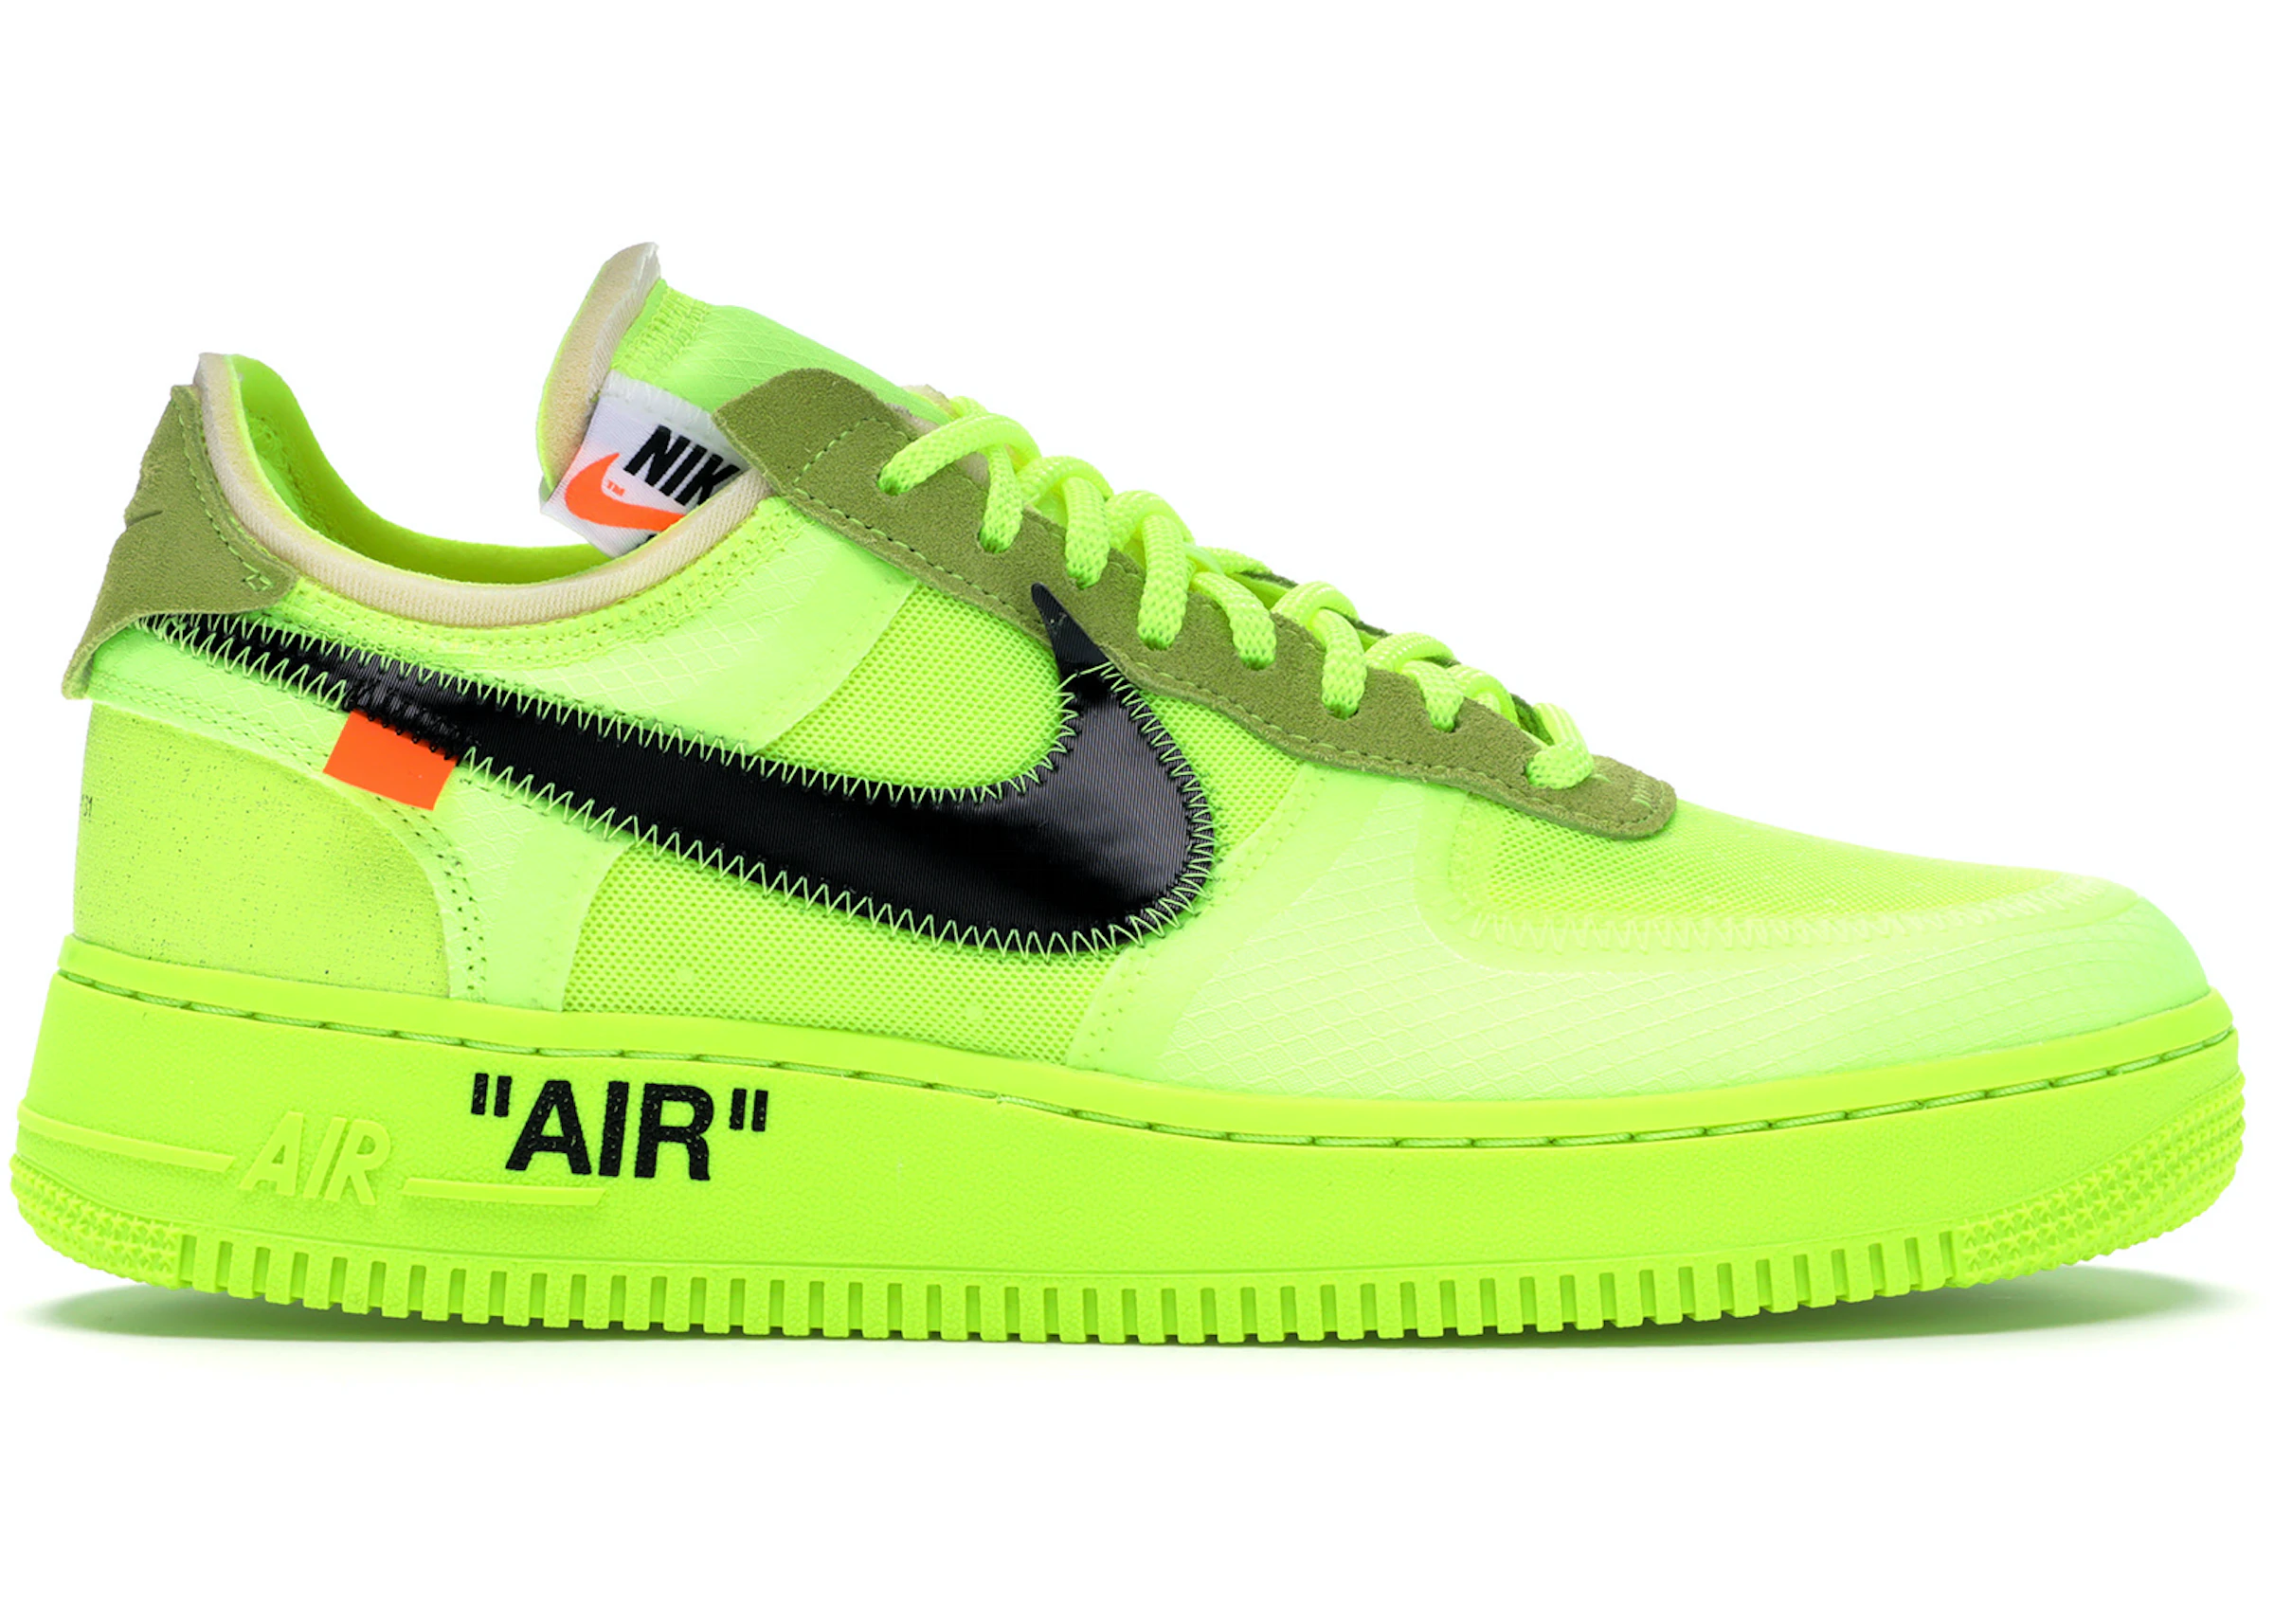 Verbazing samenzwering zelf Nike Air Force 1 Low Off-White Volt - AO4606-700 - US